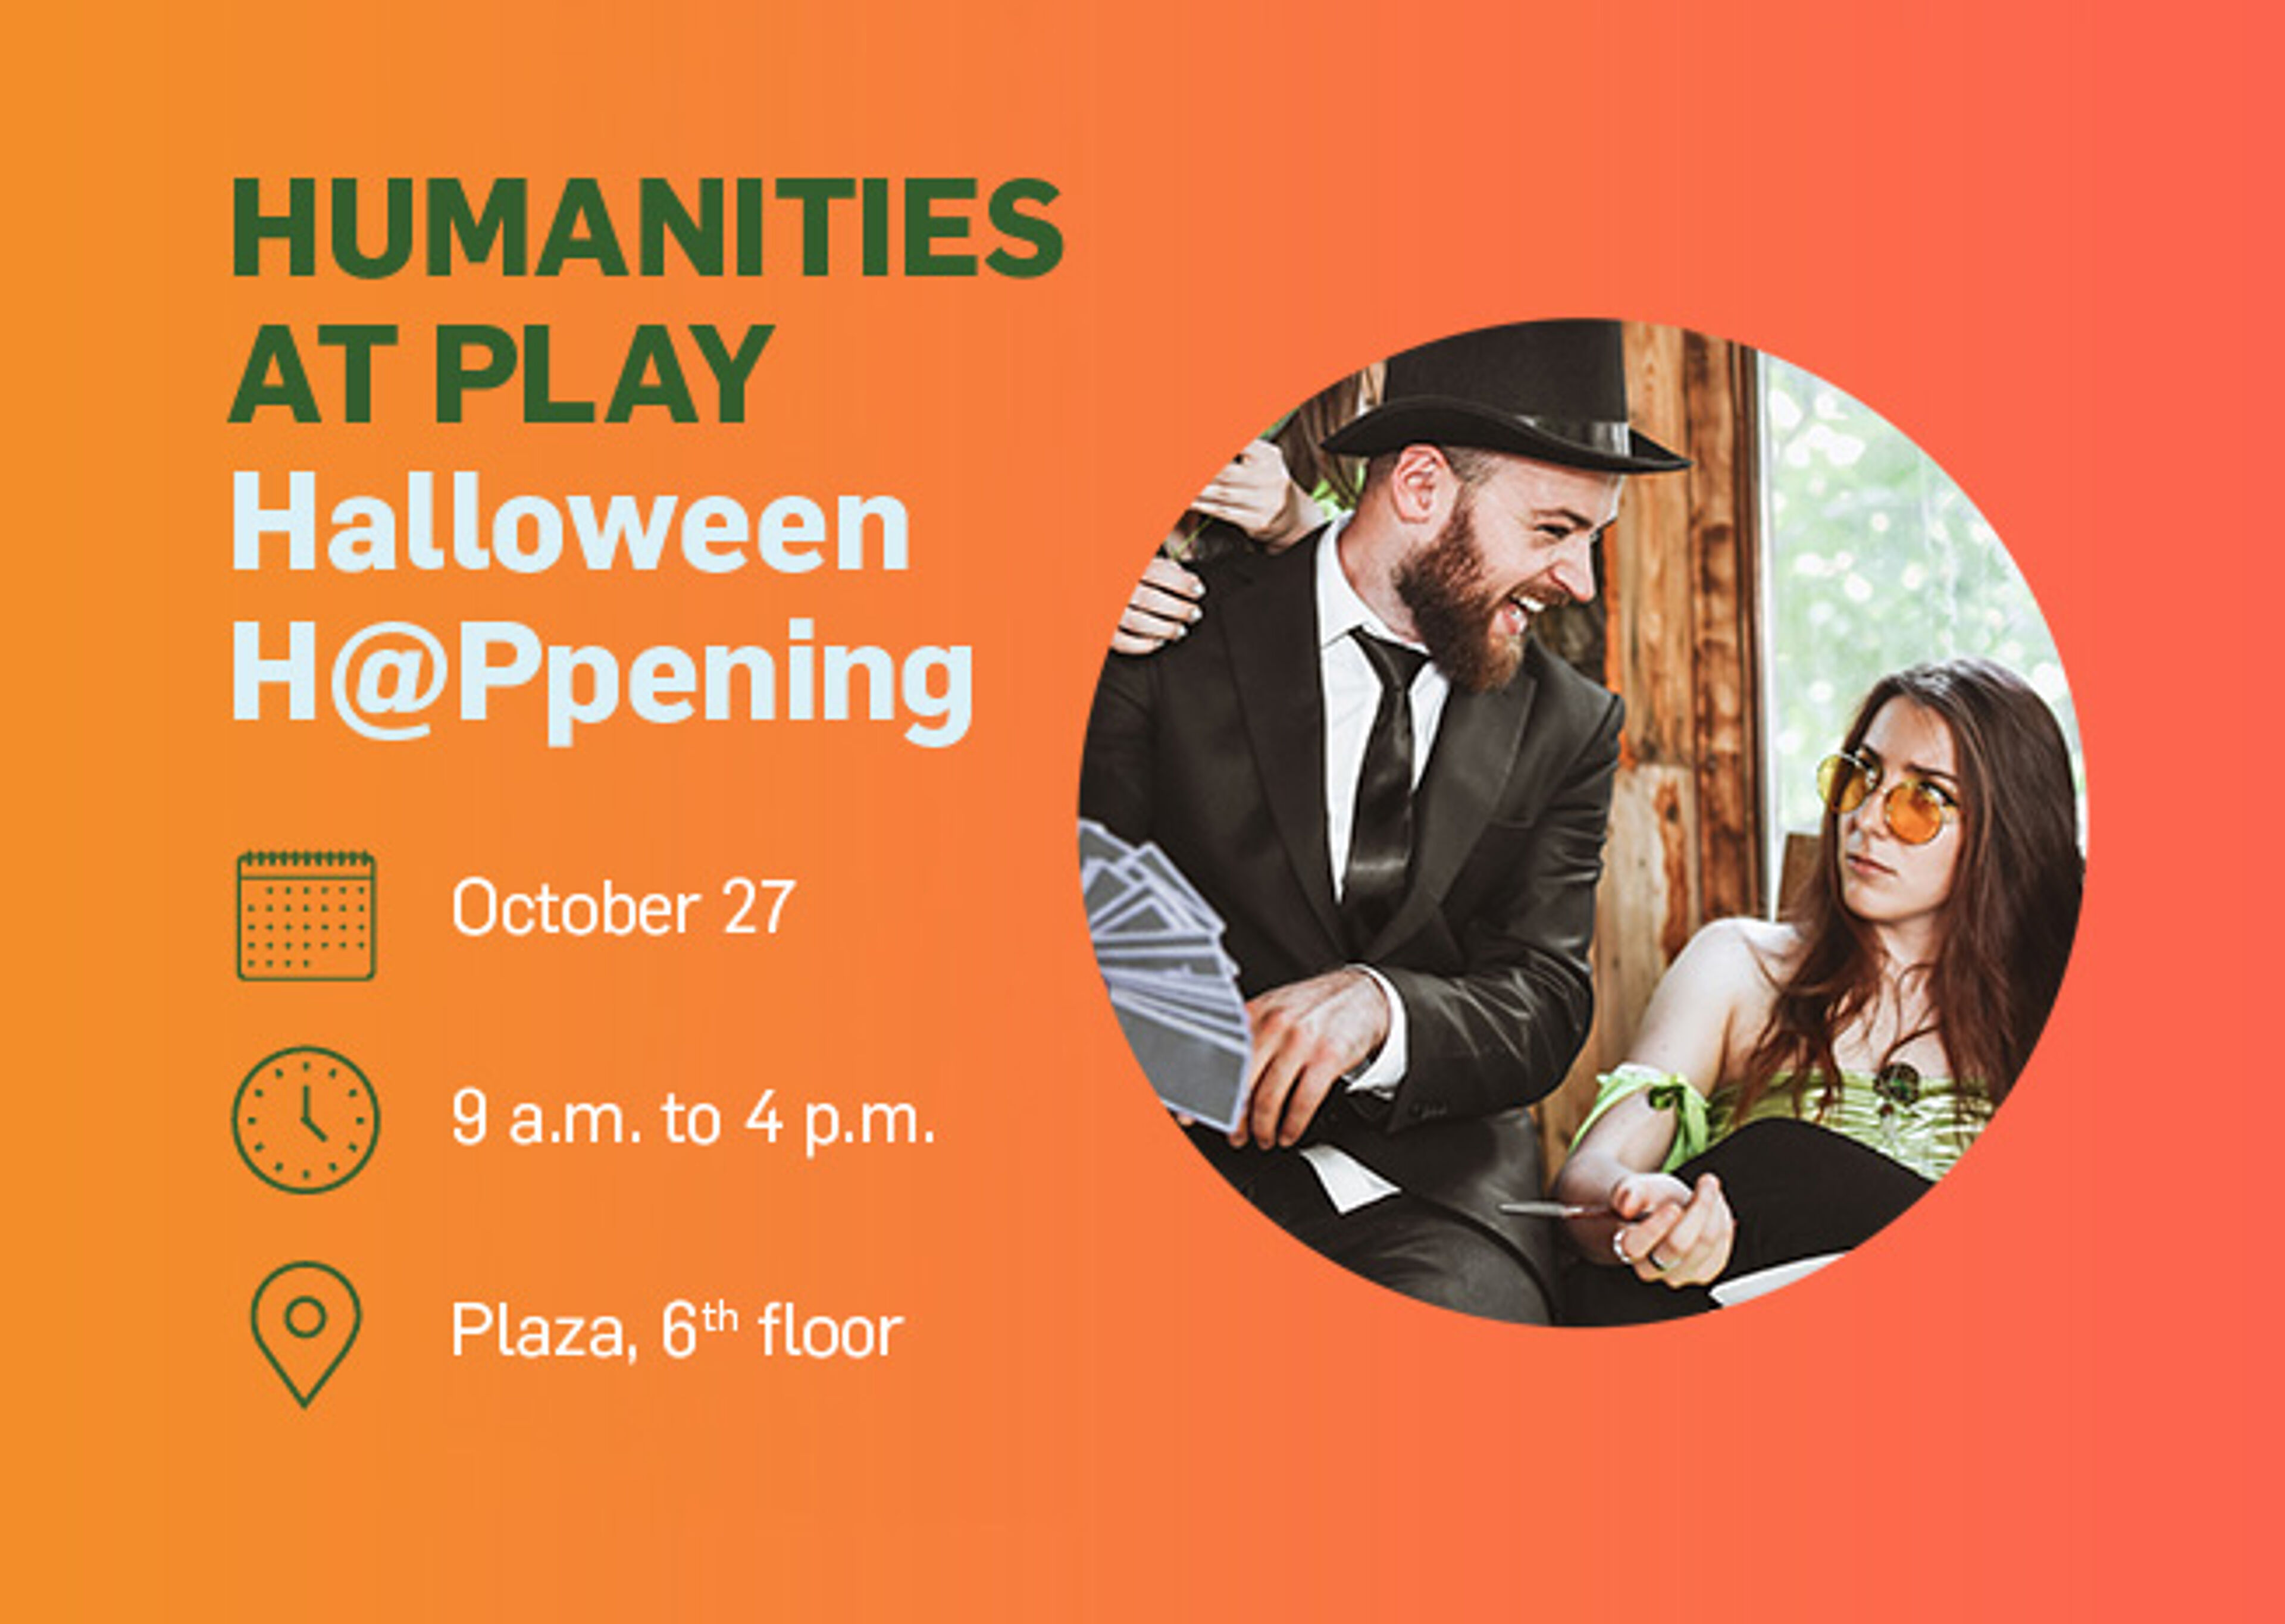 Announcement for a Halloween-themed event by the Humanities department on October 27, from 9 a.m. to 4 p.m.